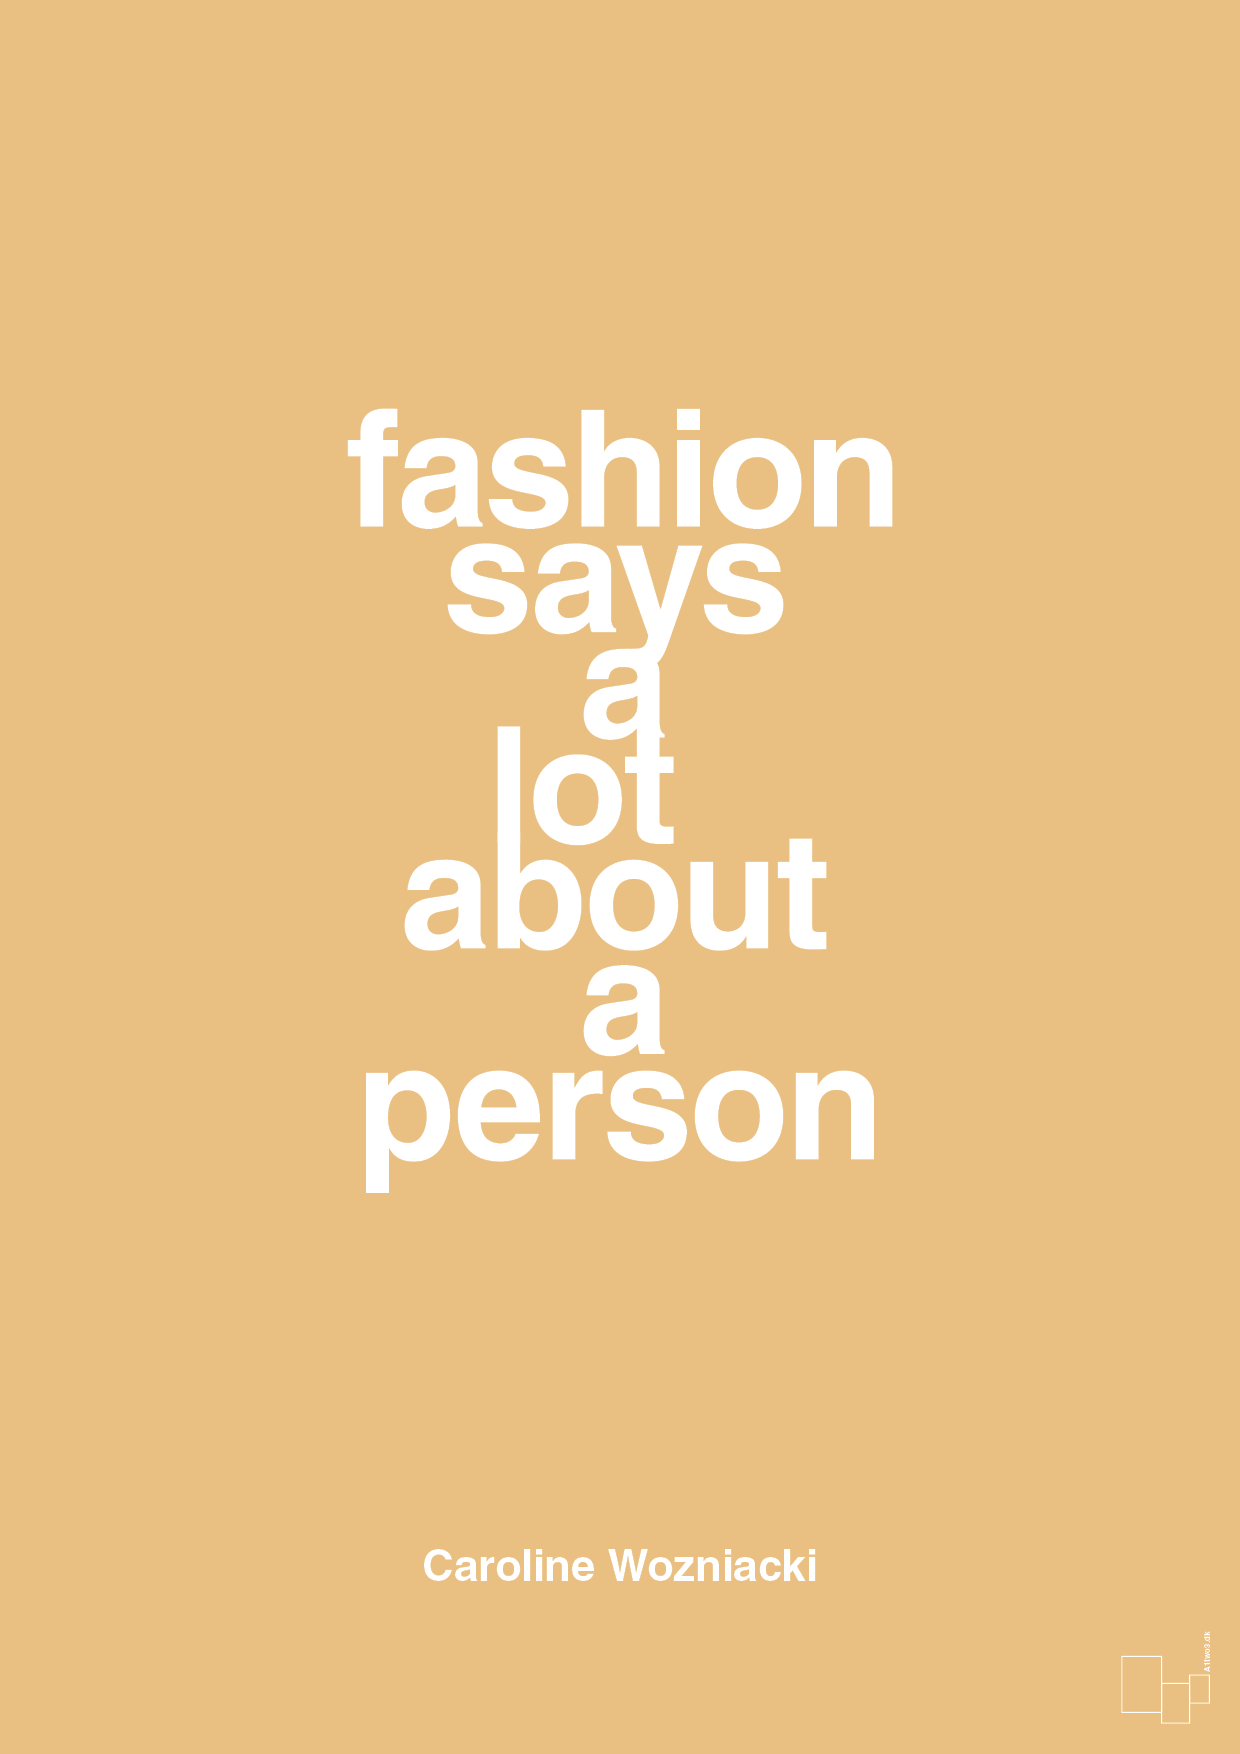 fashion says a lot about a person - Plakat med Citater i Charismatic